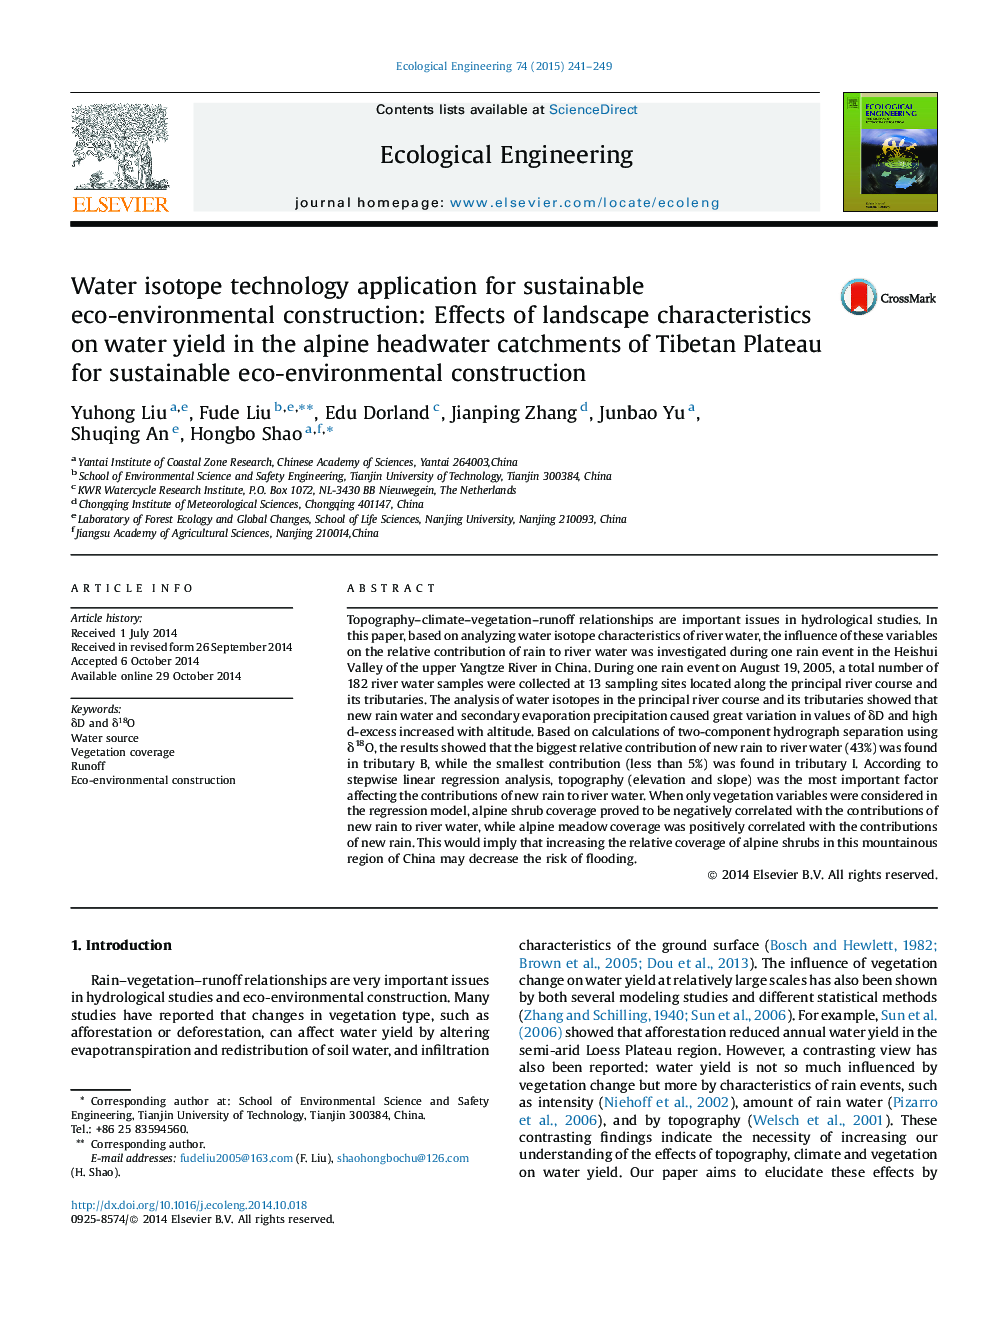 Water isotope technology application for sustainable eco-environmental construction: Effects of landscape characteristics on water yield in the alpine headwater catchments of Tibetan Plateau for sustainable eco-environmental construction